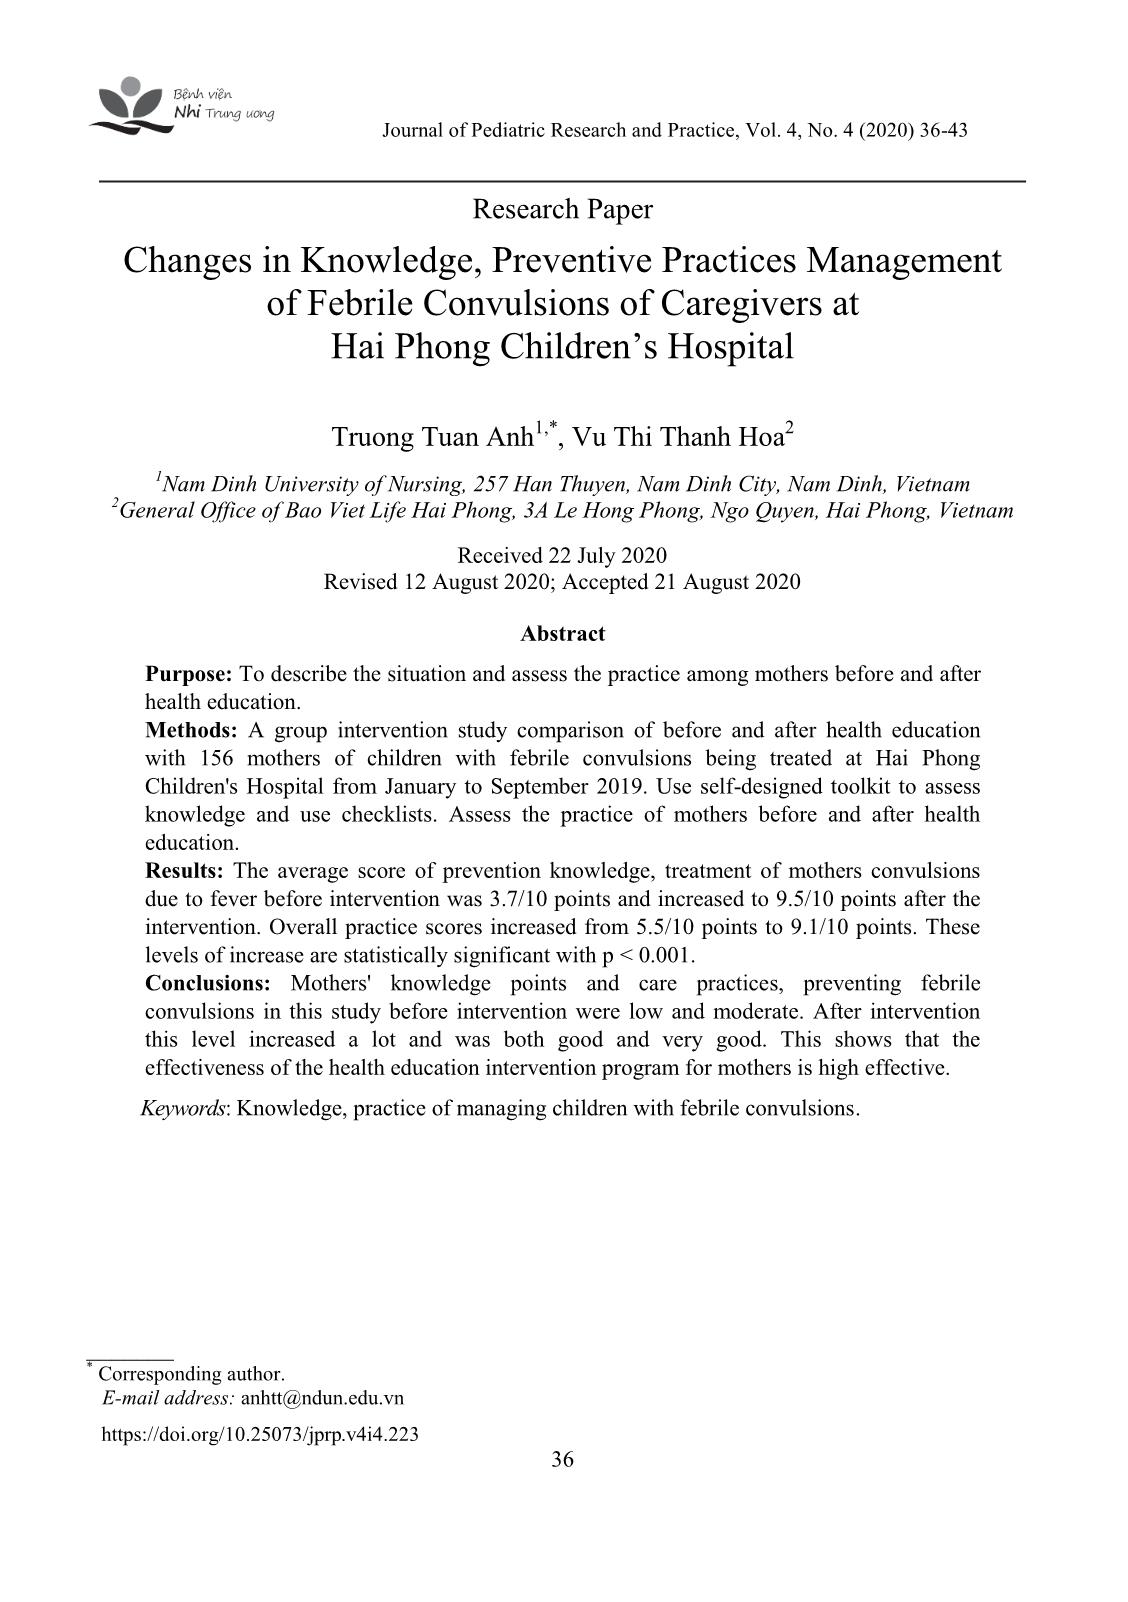 Changes in knowledge, preventive practices management of febrile convulsions of caregivers at Hai Phong children’s hospital trang 1